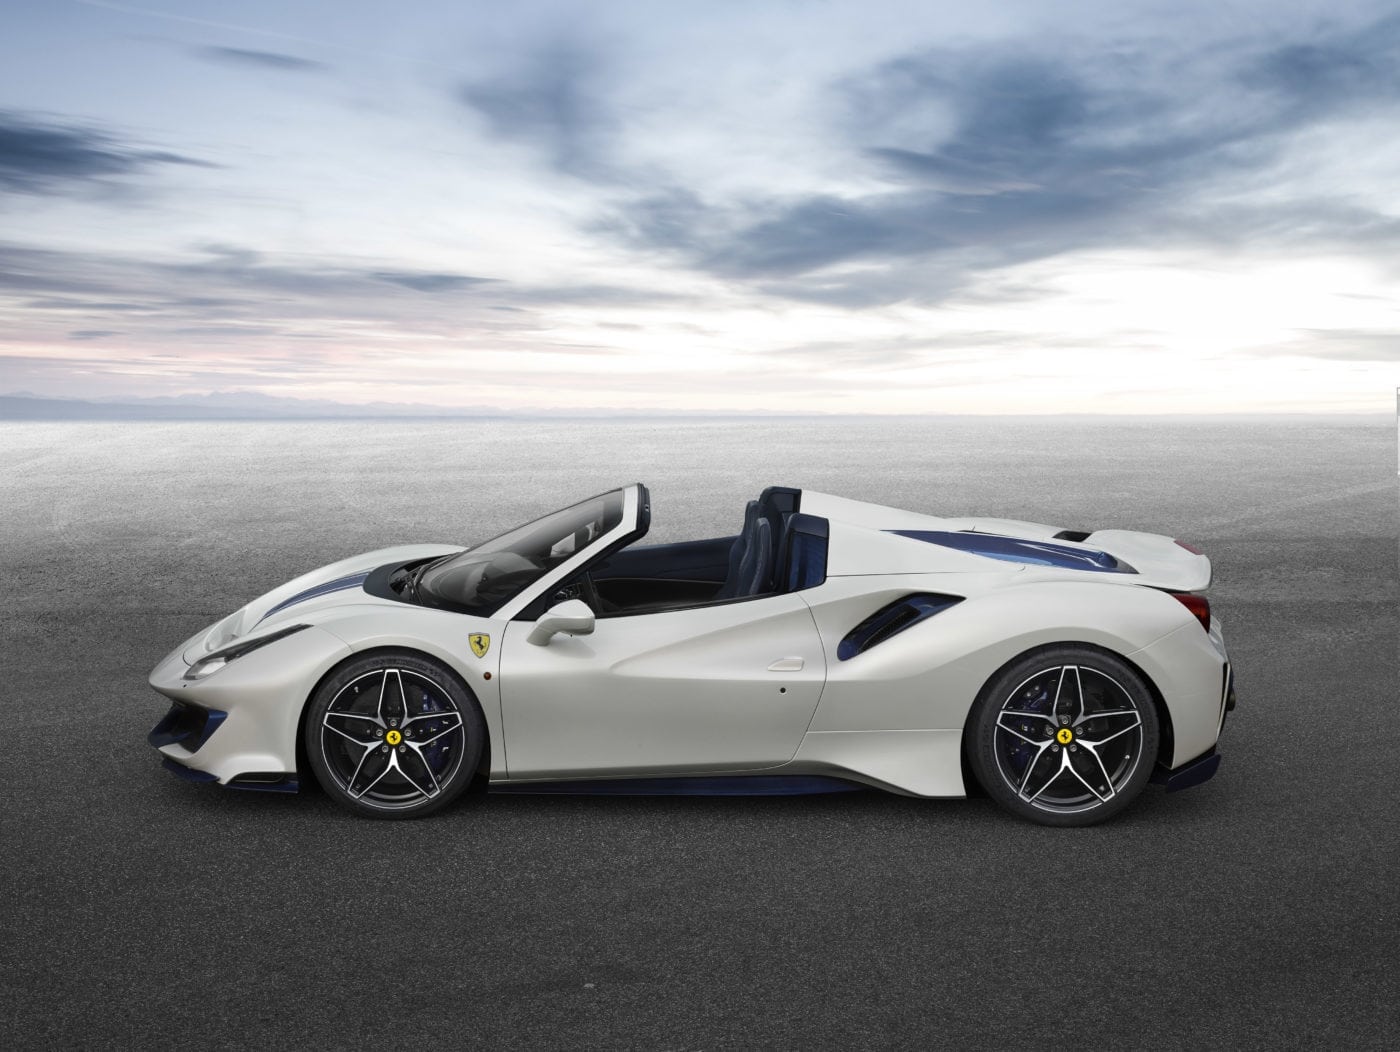 The Ferrari 488 Pista Spider looks amazing from any angle.